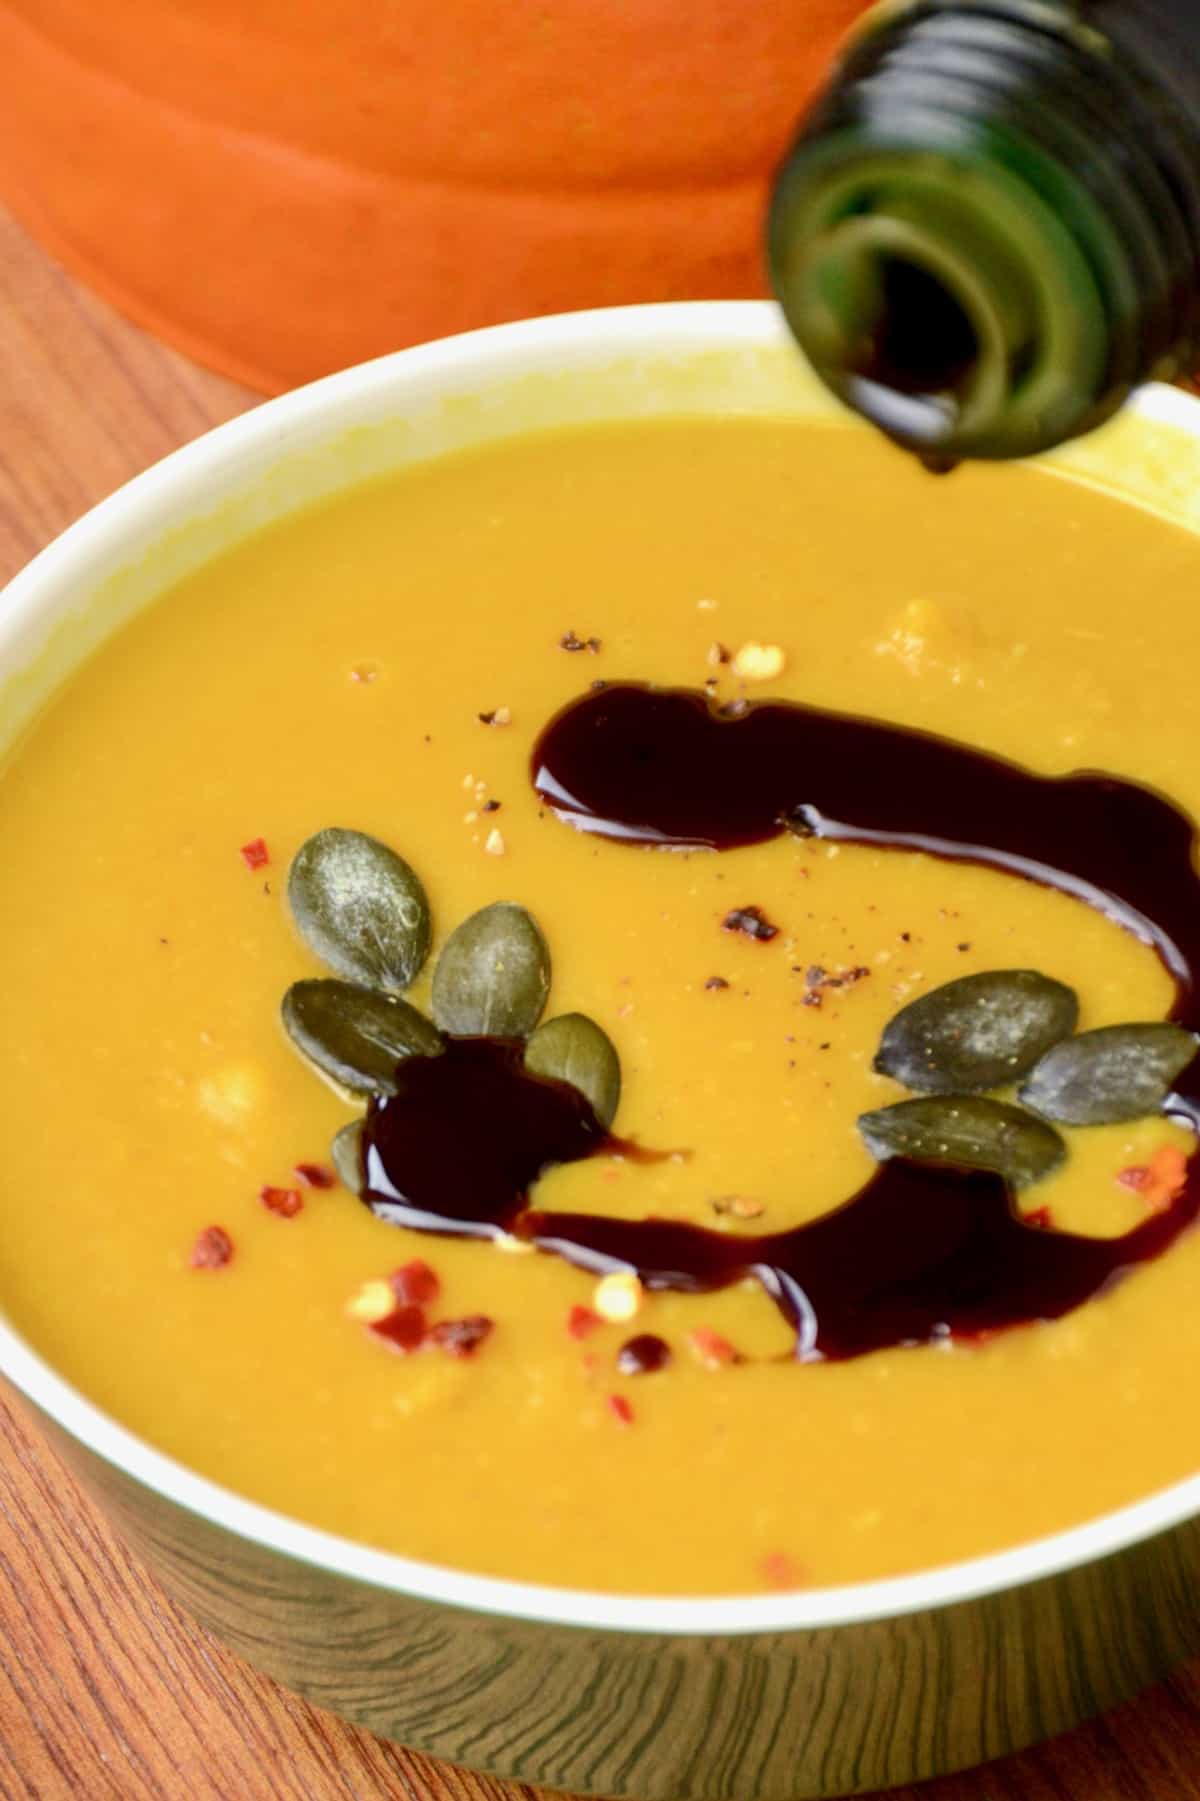 A drizzle of dark pumpkin seed oil poured on top of the soup.